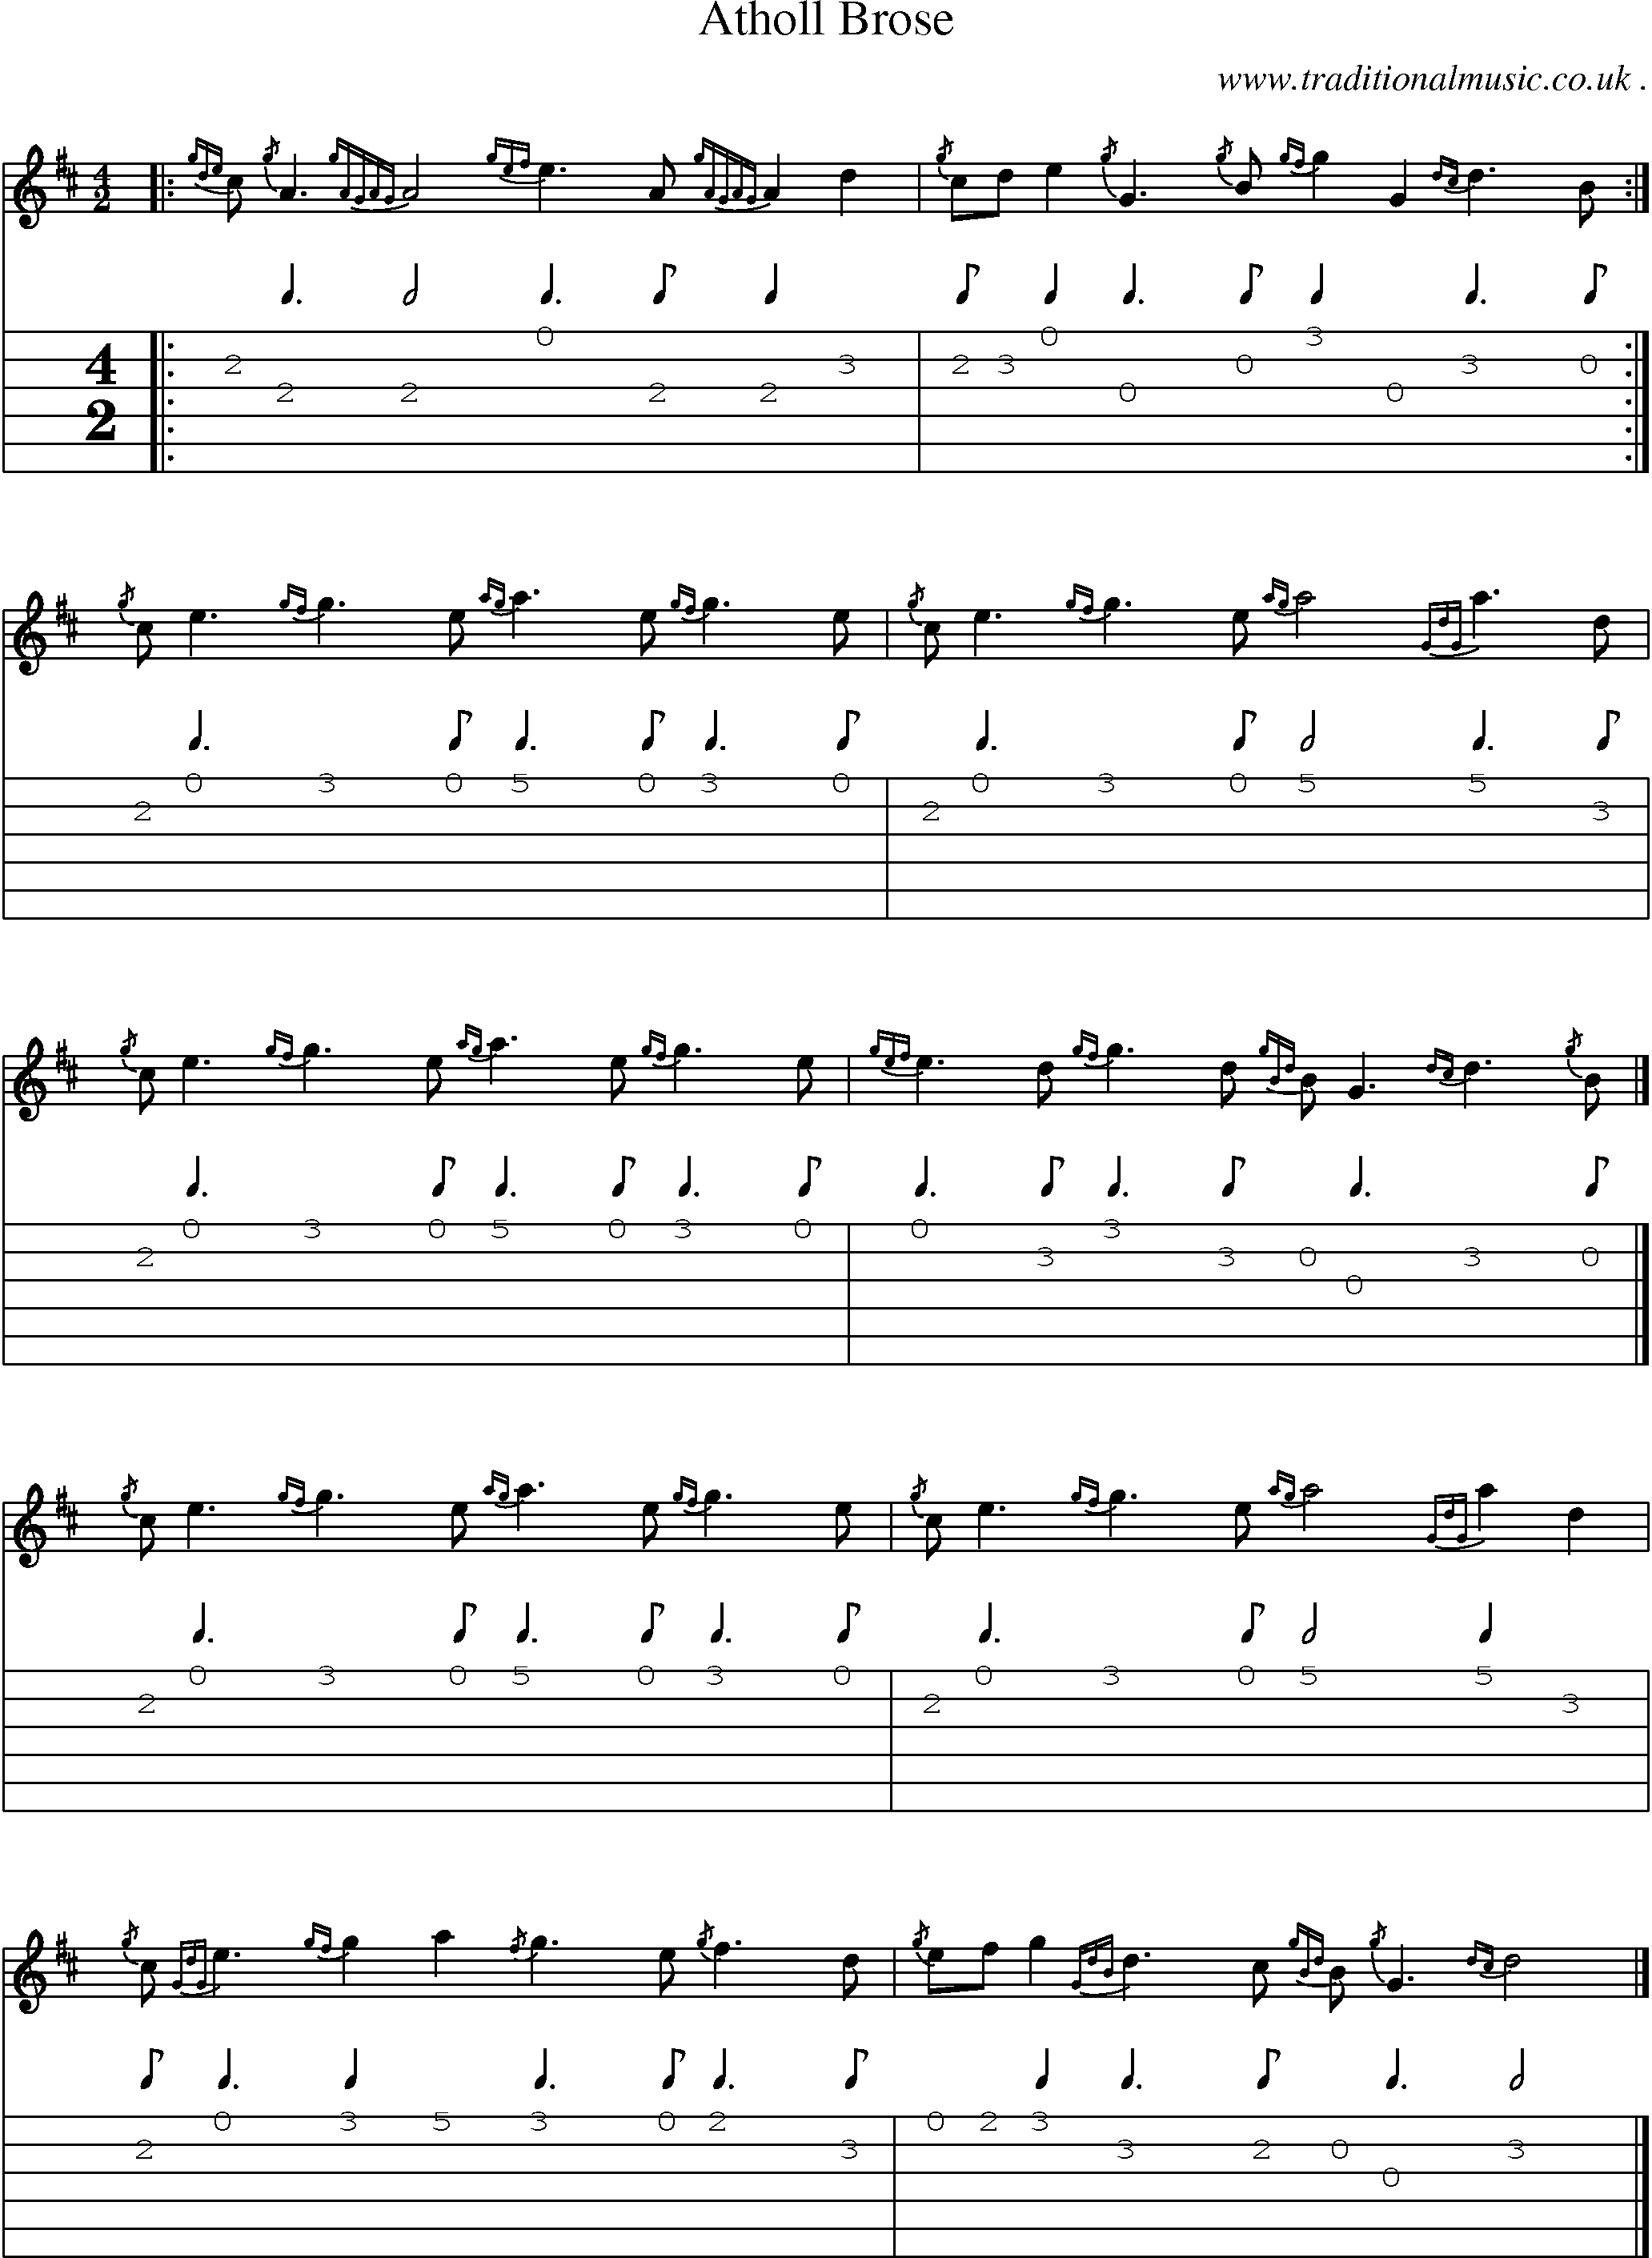 Sheet-music  score, Chords and Guitar Tabs for Atholl Brose